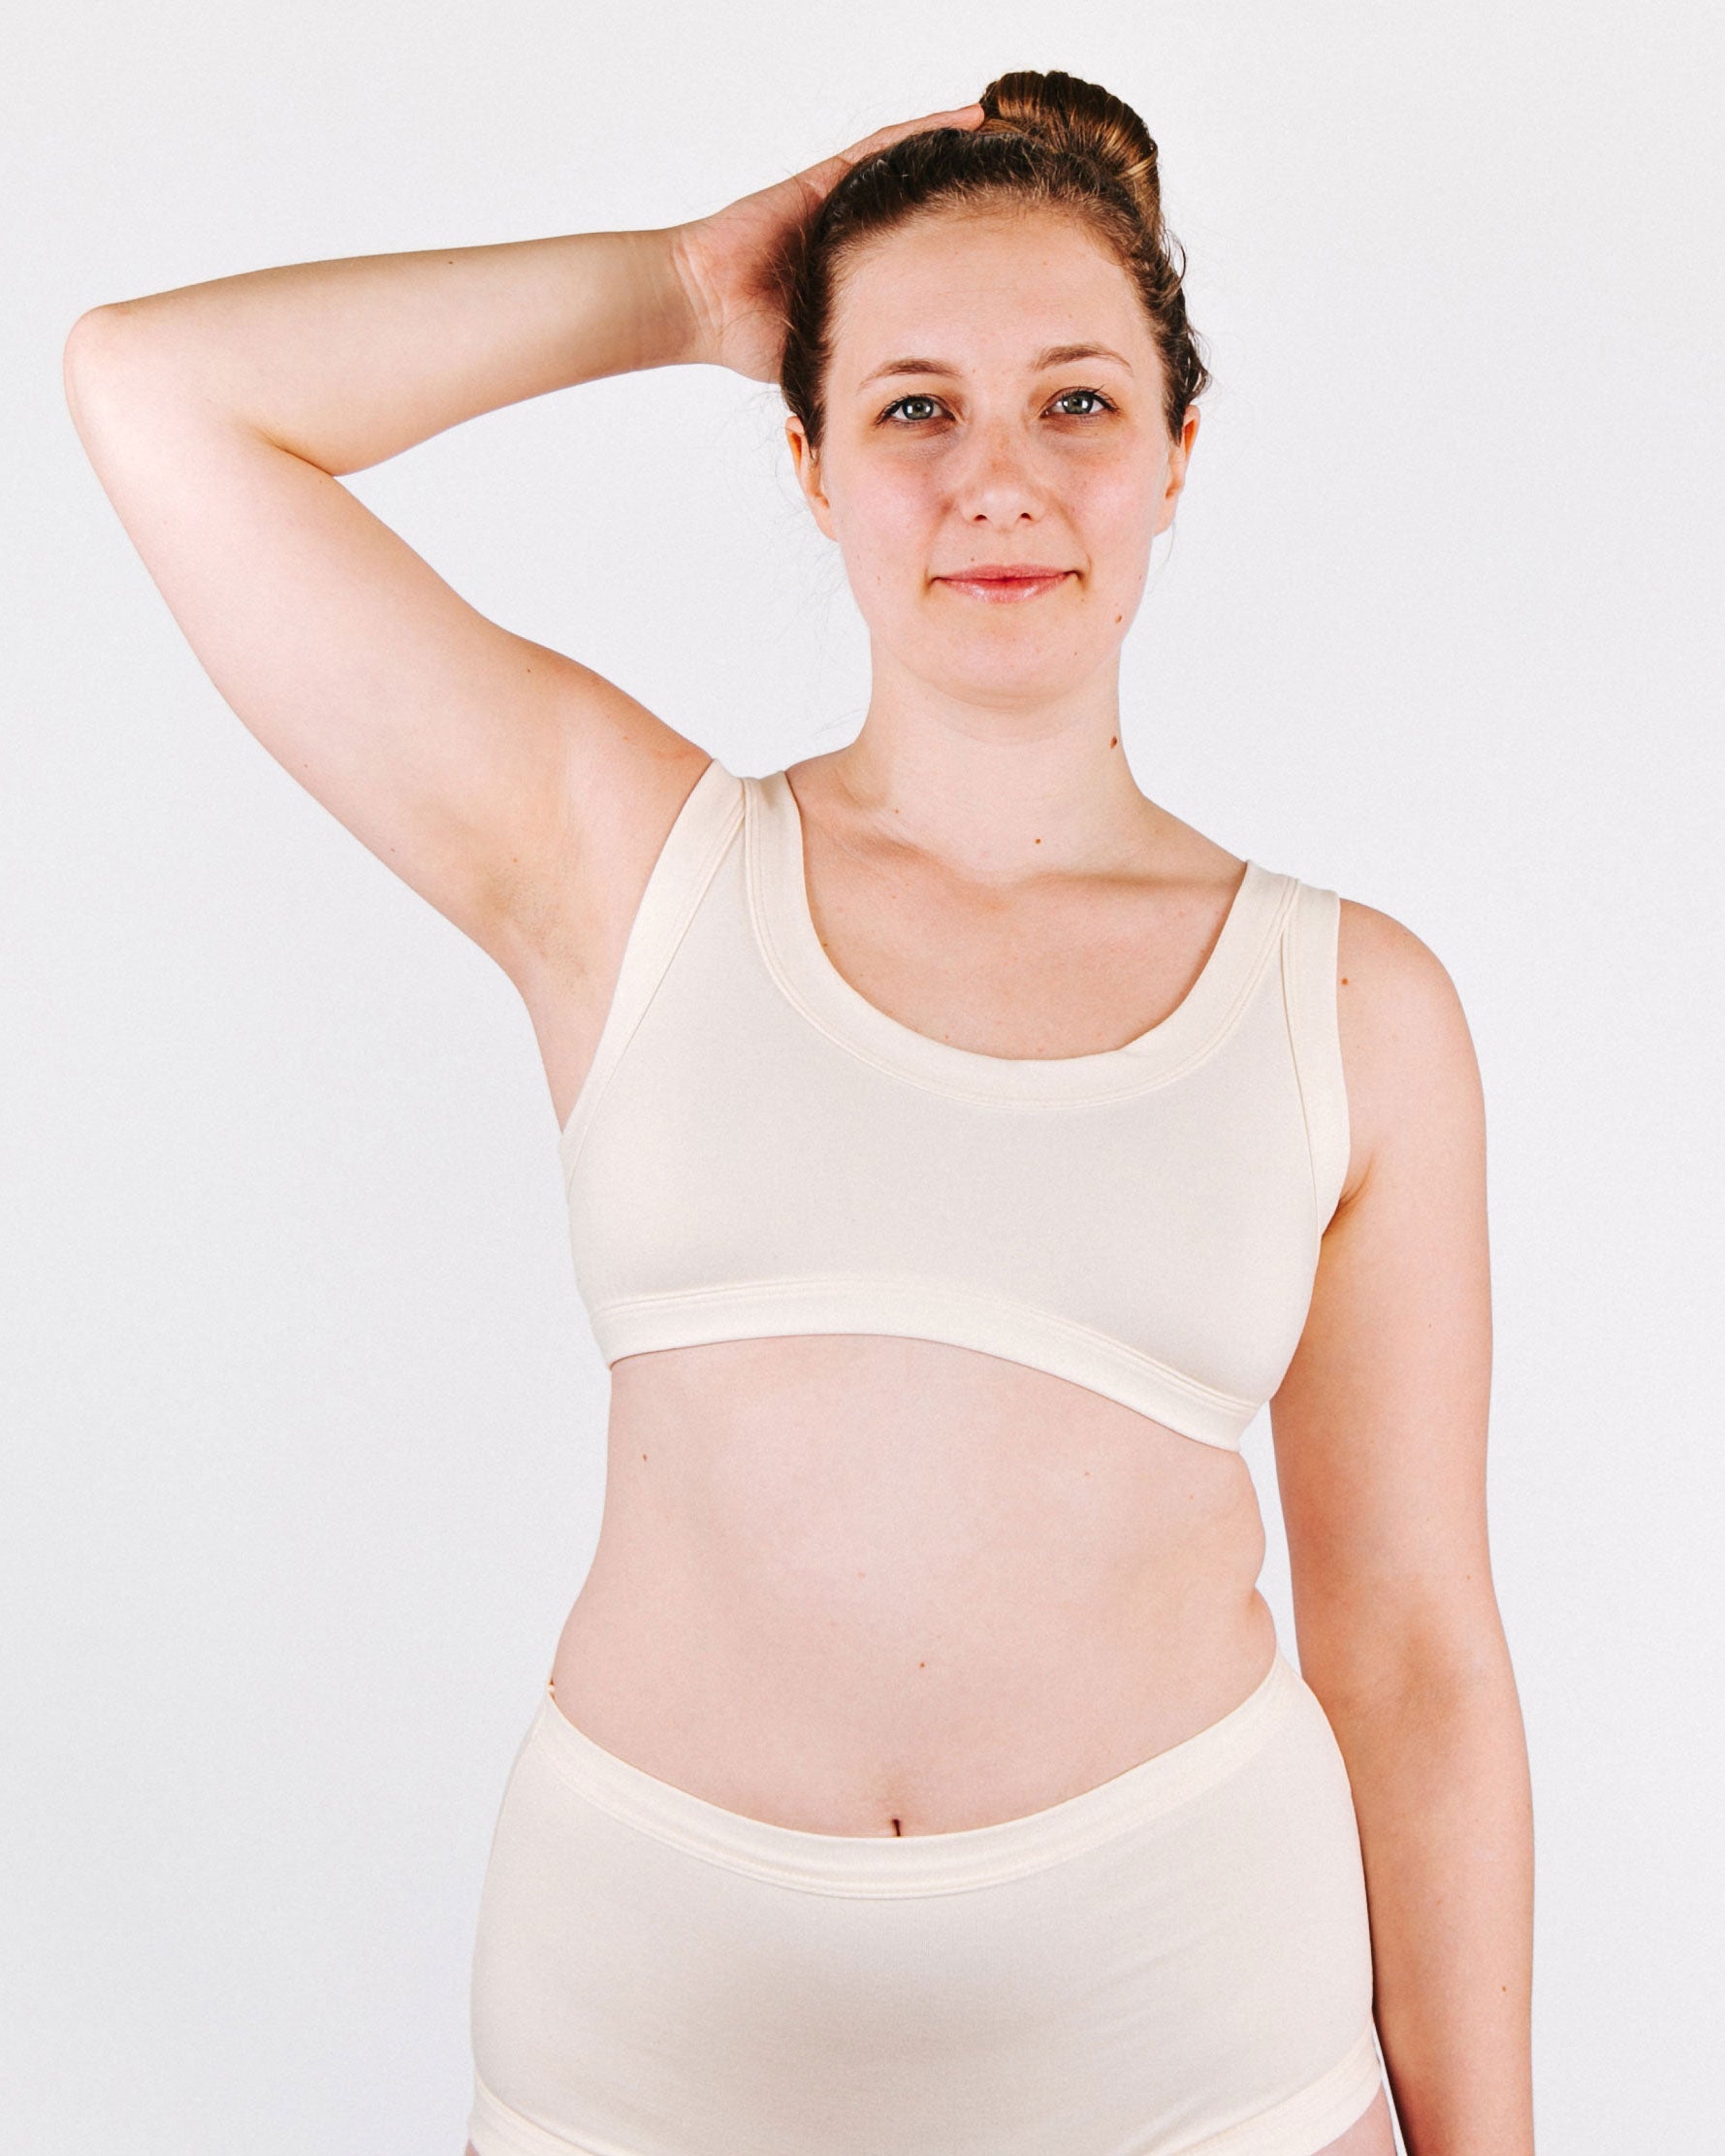 Fit photo from the front of Thunderpants organic cotton Bralette and Original Style underwear in off-white on model.